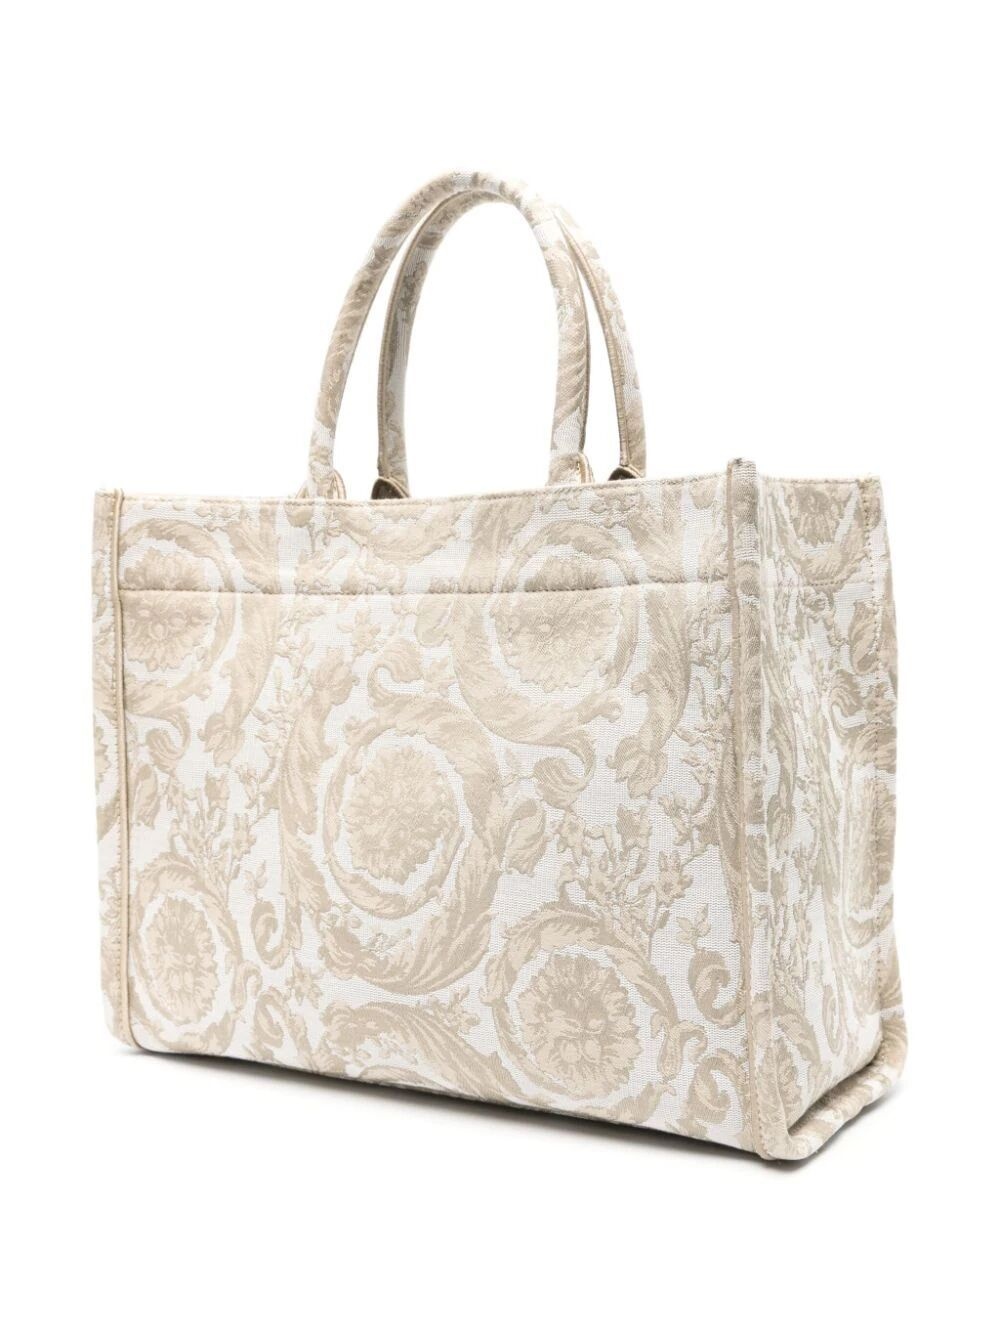 LARGE TOTE EMBROIDERY JACQUARD - 4